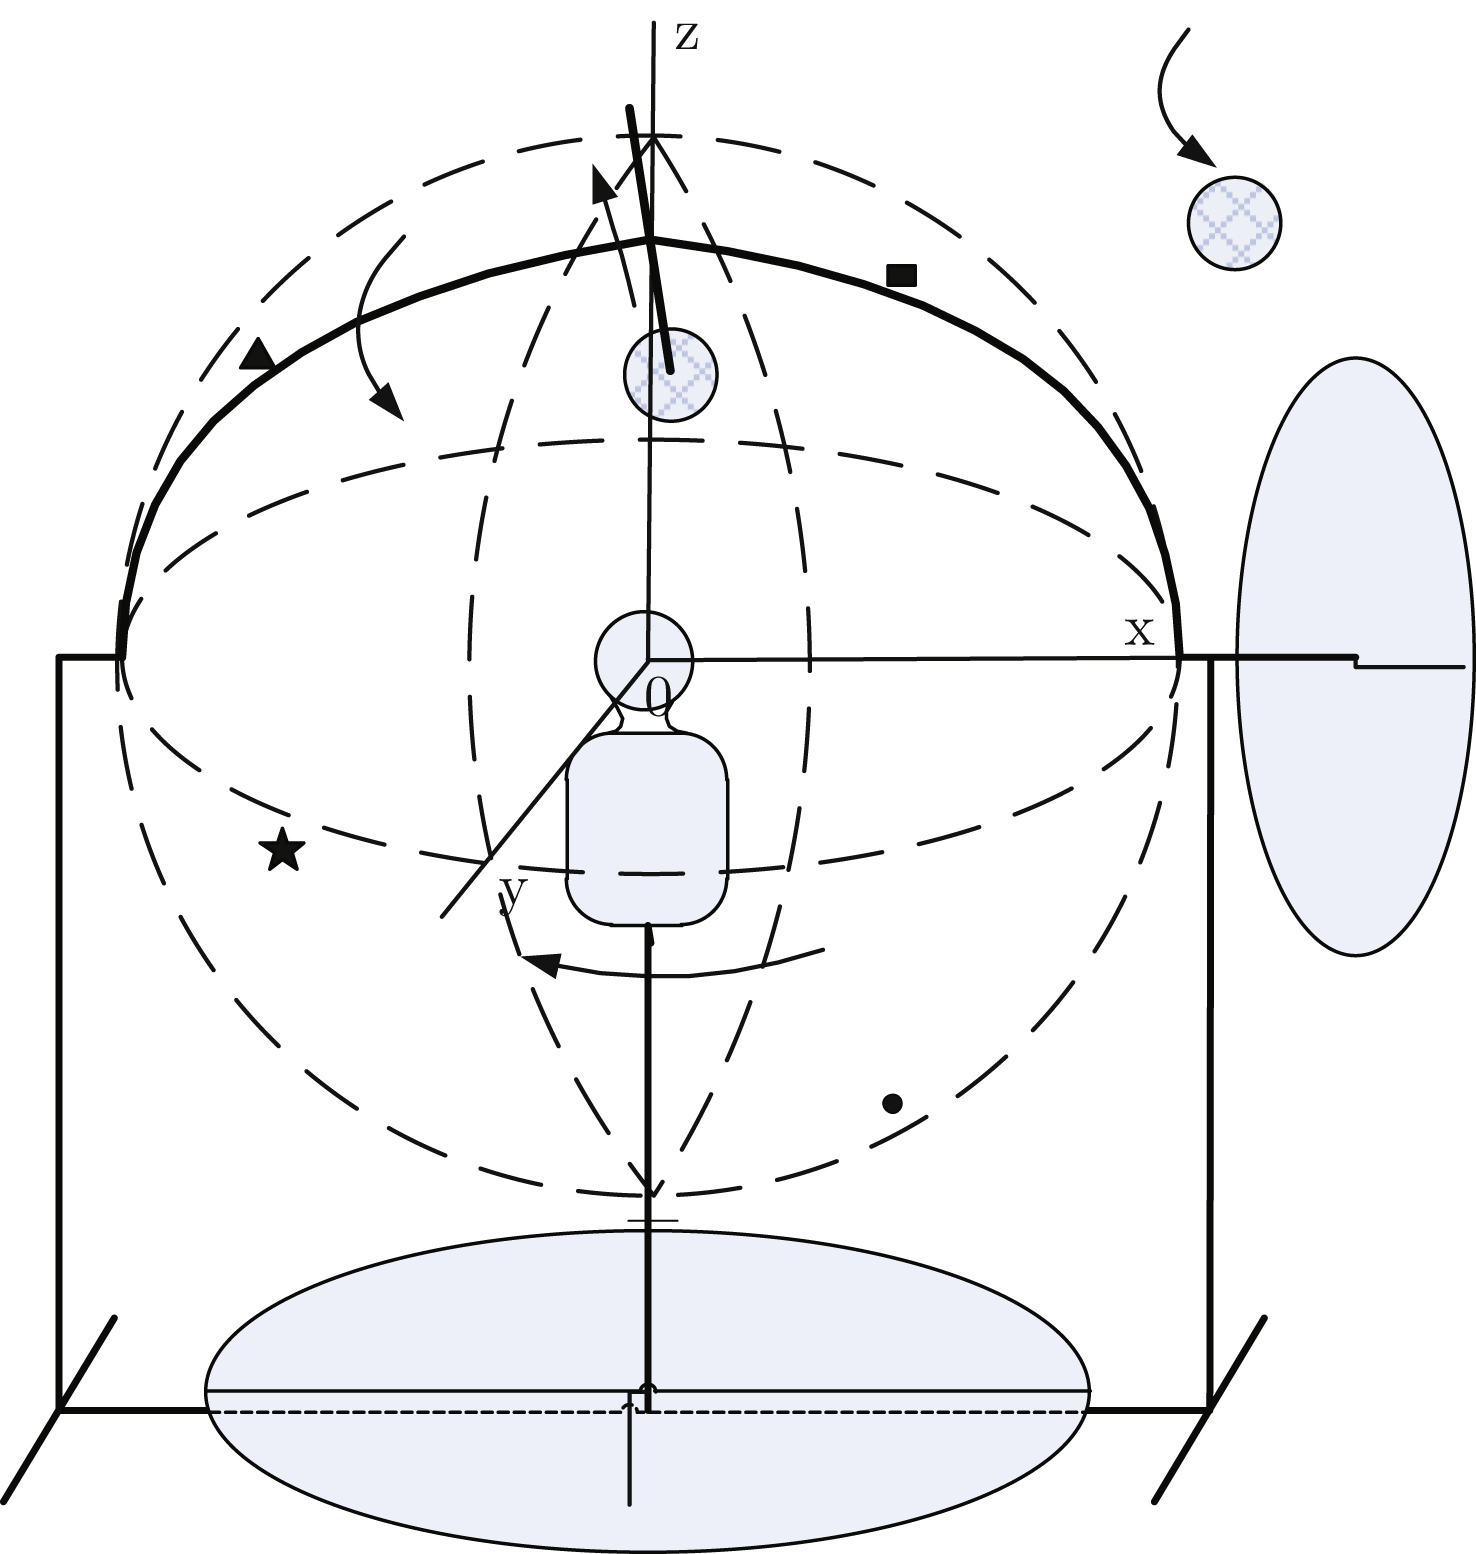 Experimental setup for three-dimensional spatial perception characteristic (inside the figure: up, back, right, front, rotate direction, wireless speaker, dial, indicator and artificial head).